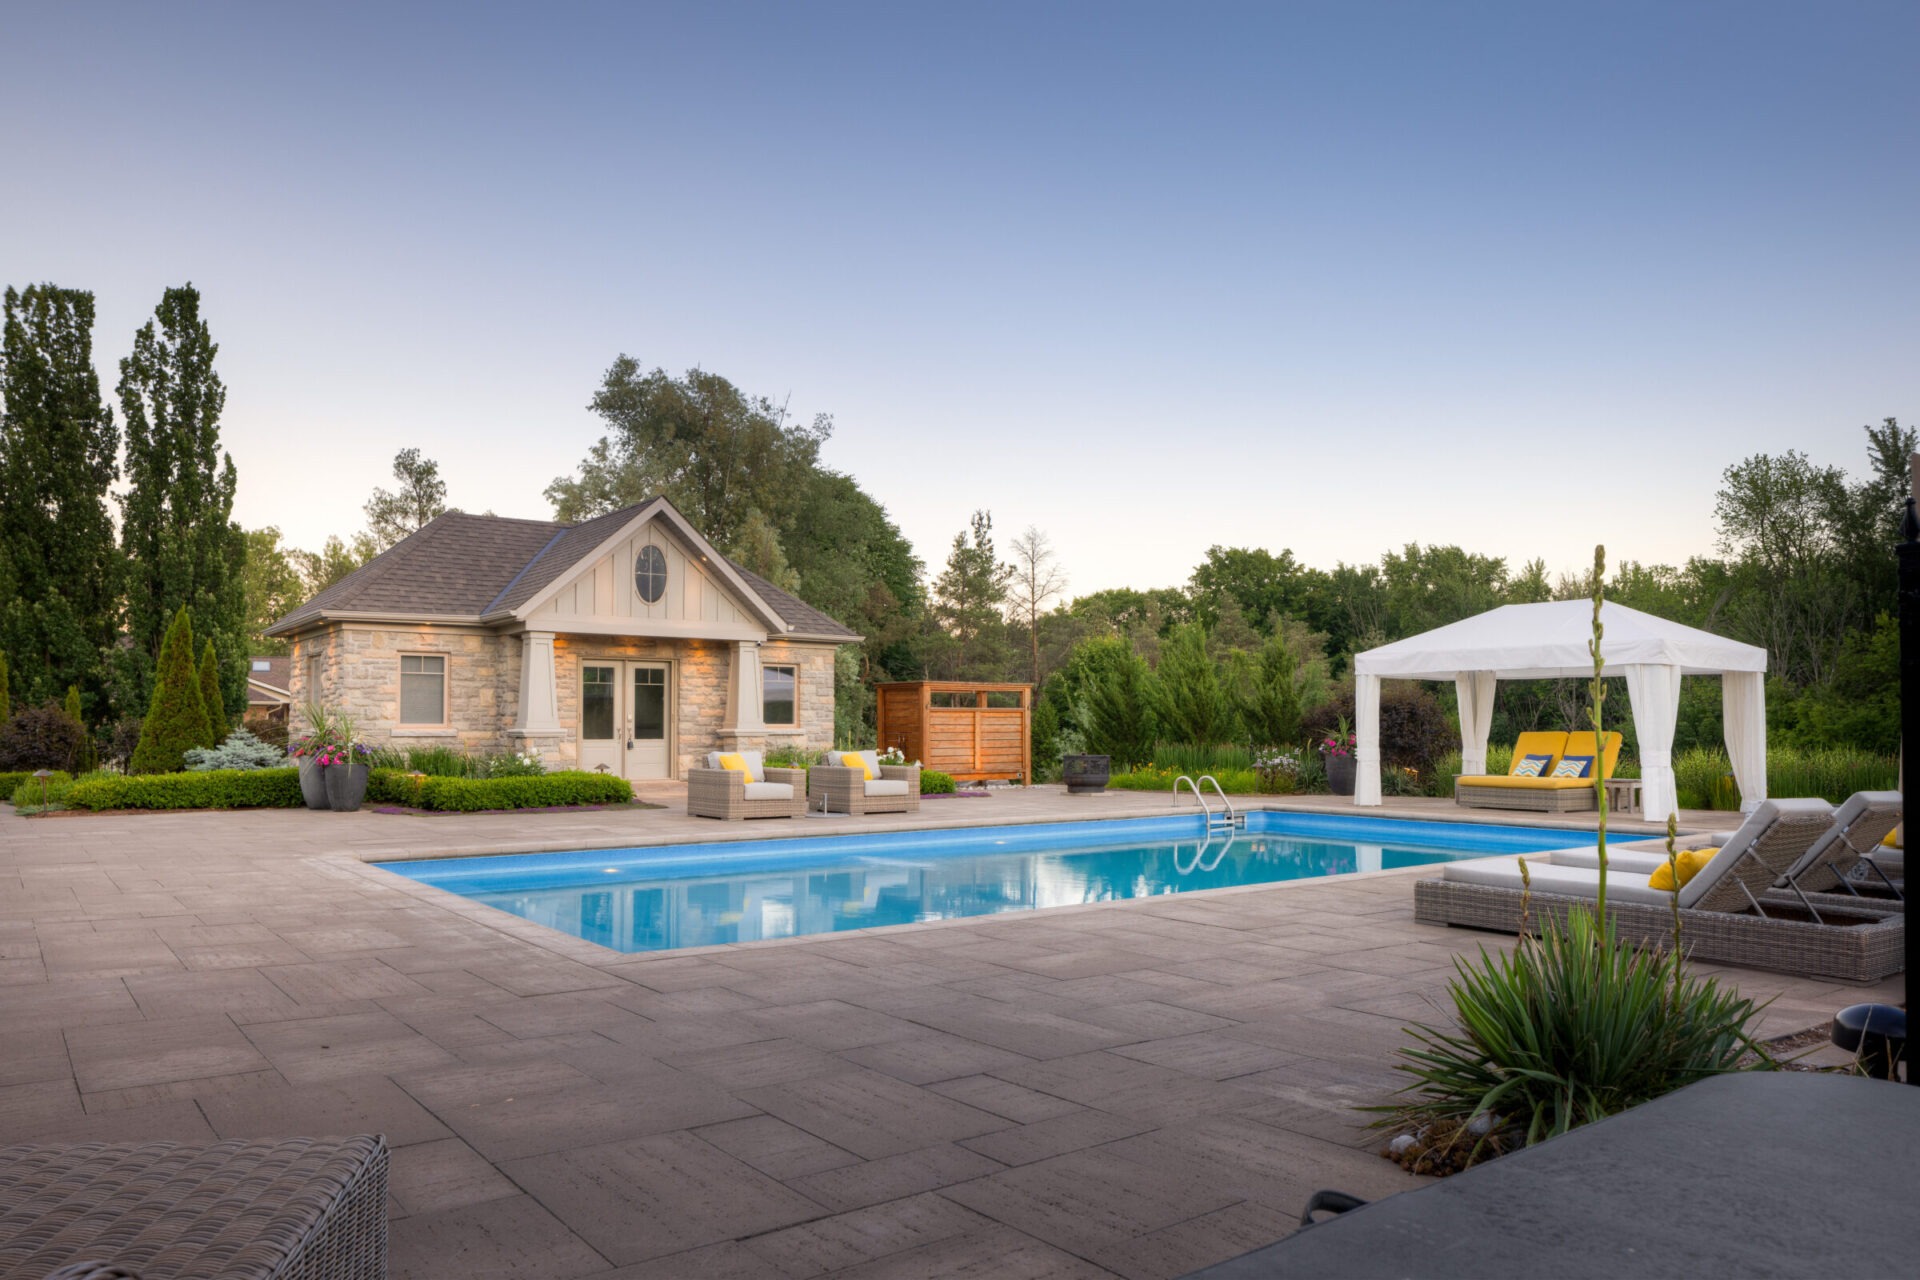 A serene backyard with a swimming pool, patio, poolside cabana, comfortable outdoor furniture, and a stone house surrounded by lush greenery at dusk.